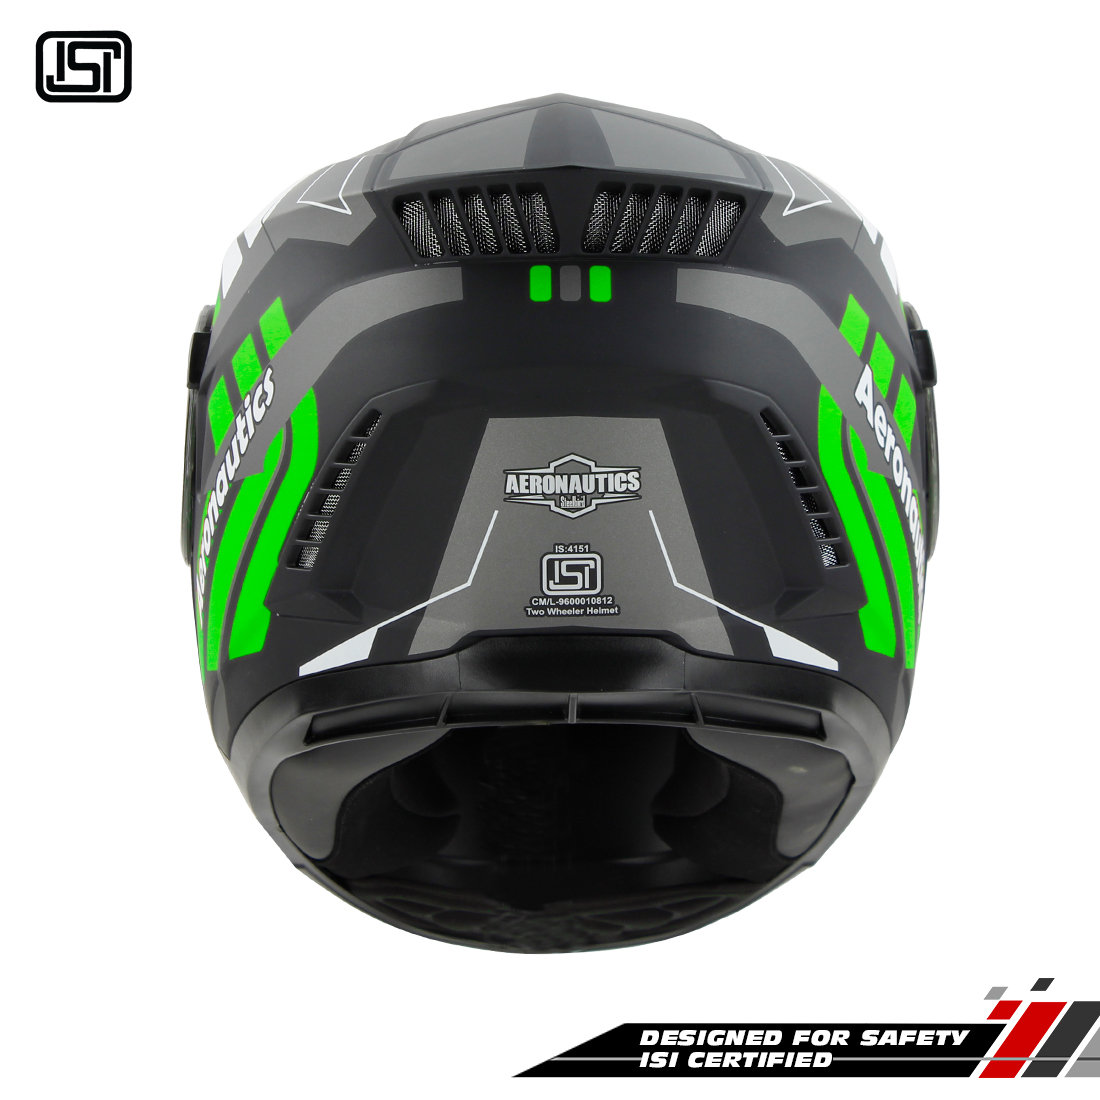 Steelbird SBH-40 Vanguard ISI Certified Full Face Graphic Helmet For Men And Women With Inner Sun Shield (Glossy Black Green)